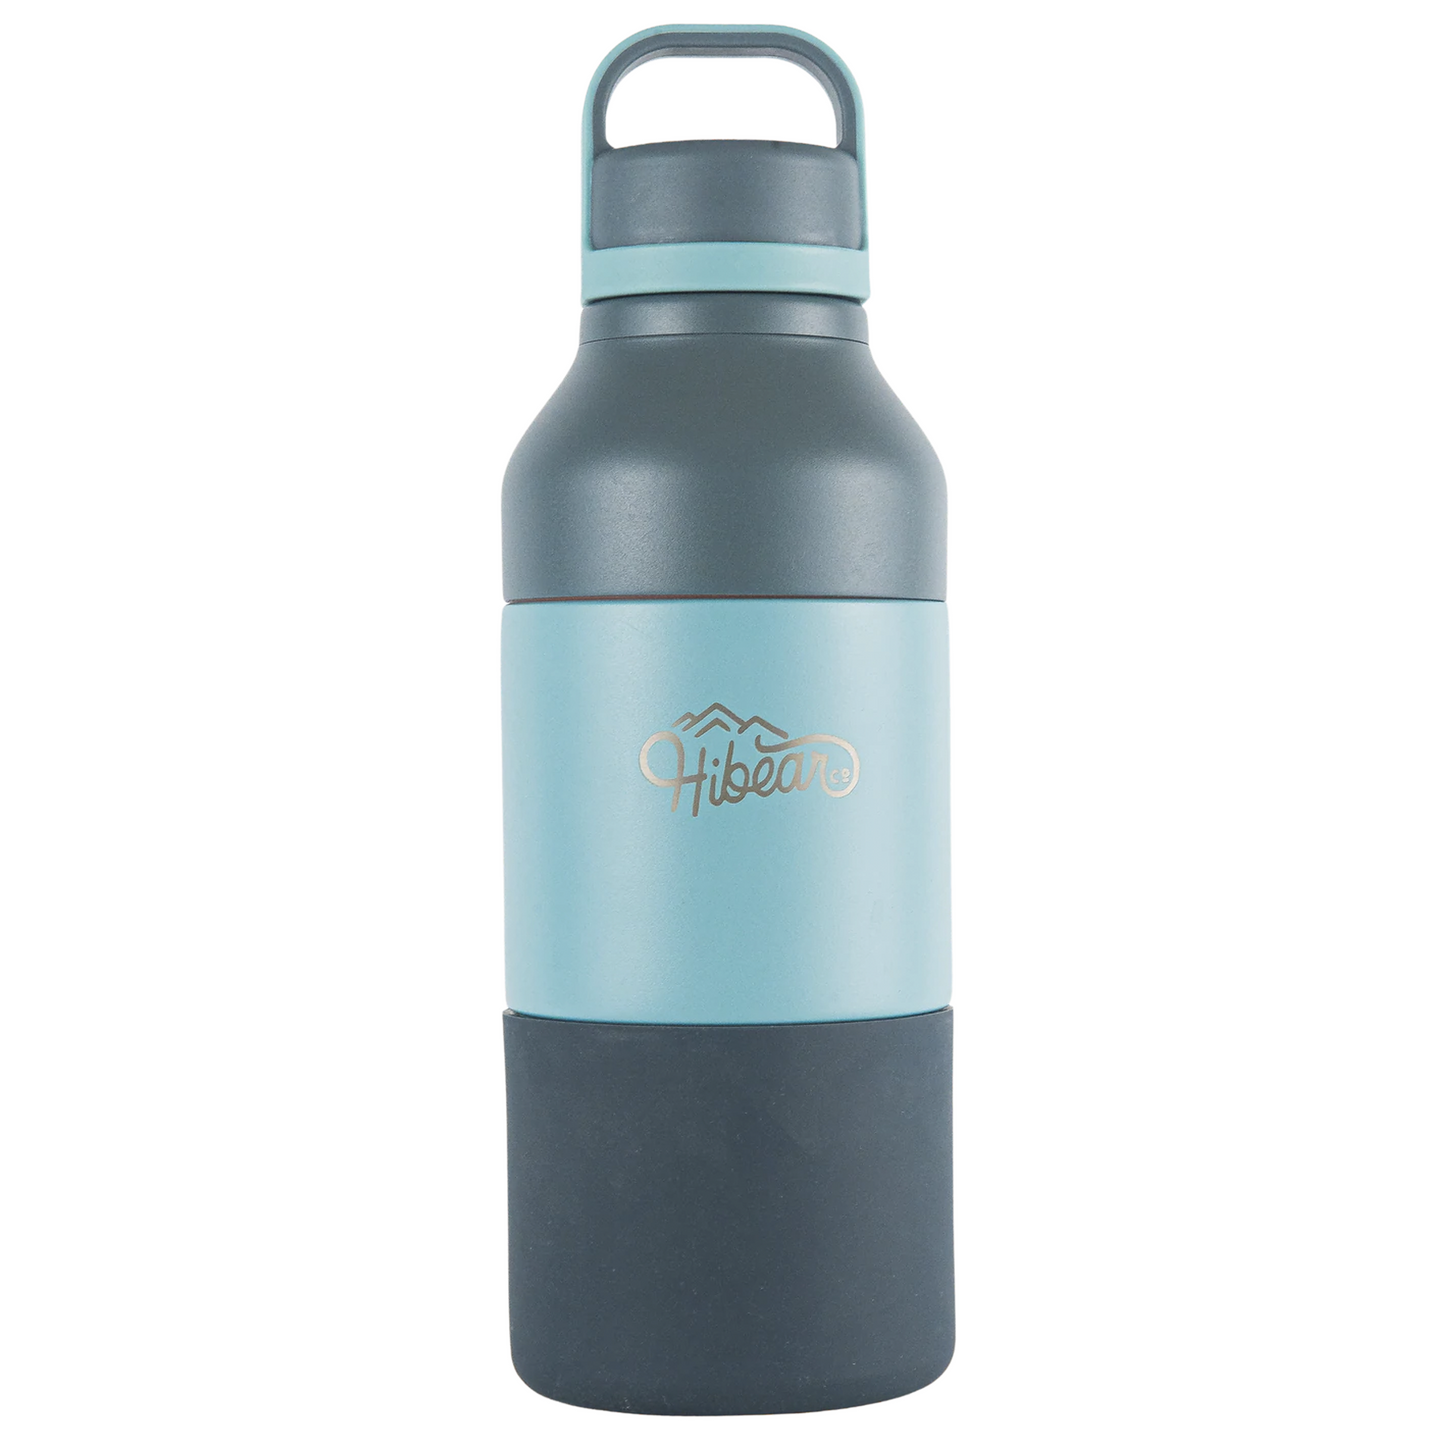 All-Day Adventure Flask Big Adventure Outfitters